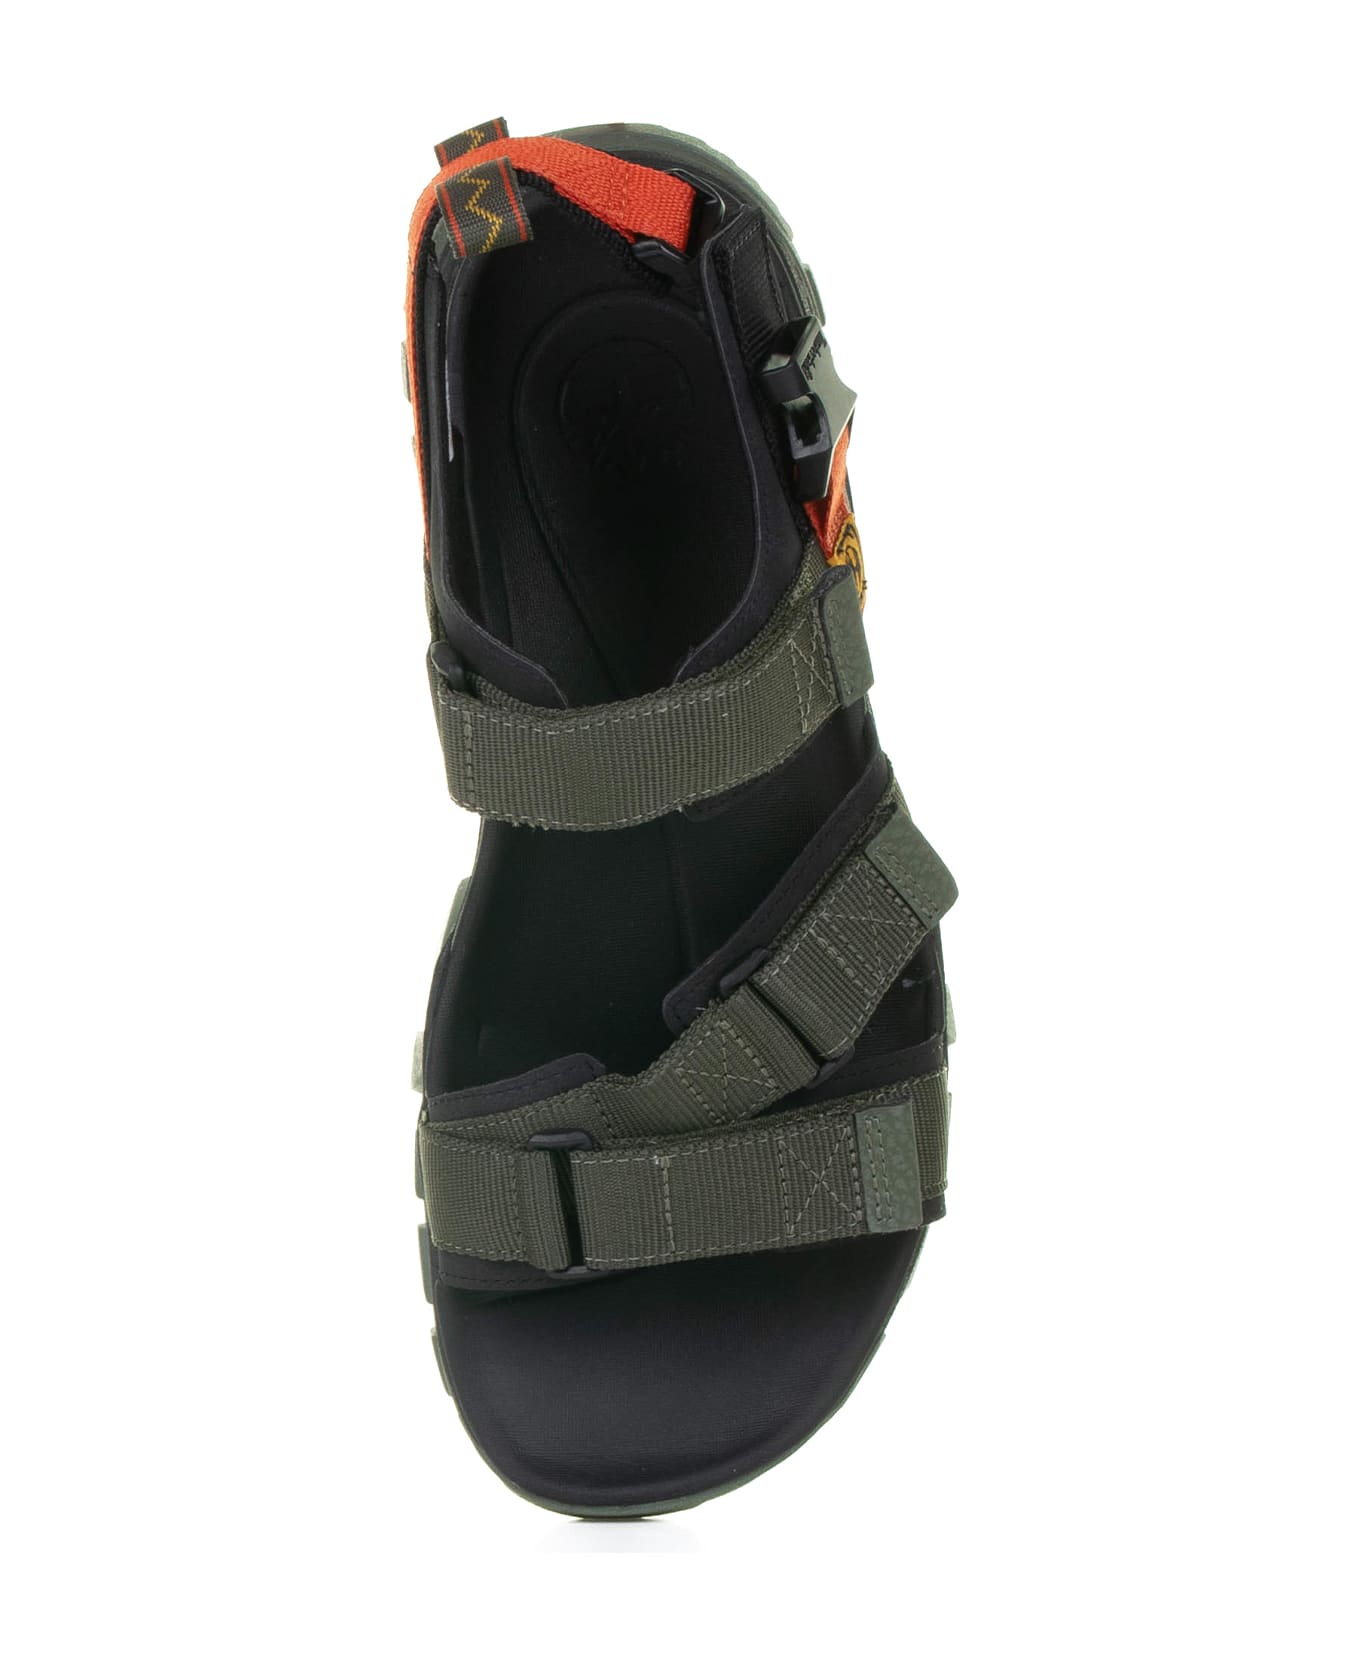 Timberland Sandals With Adjustable Velcro Straps - LEAF GREEN